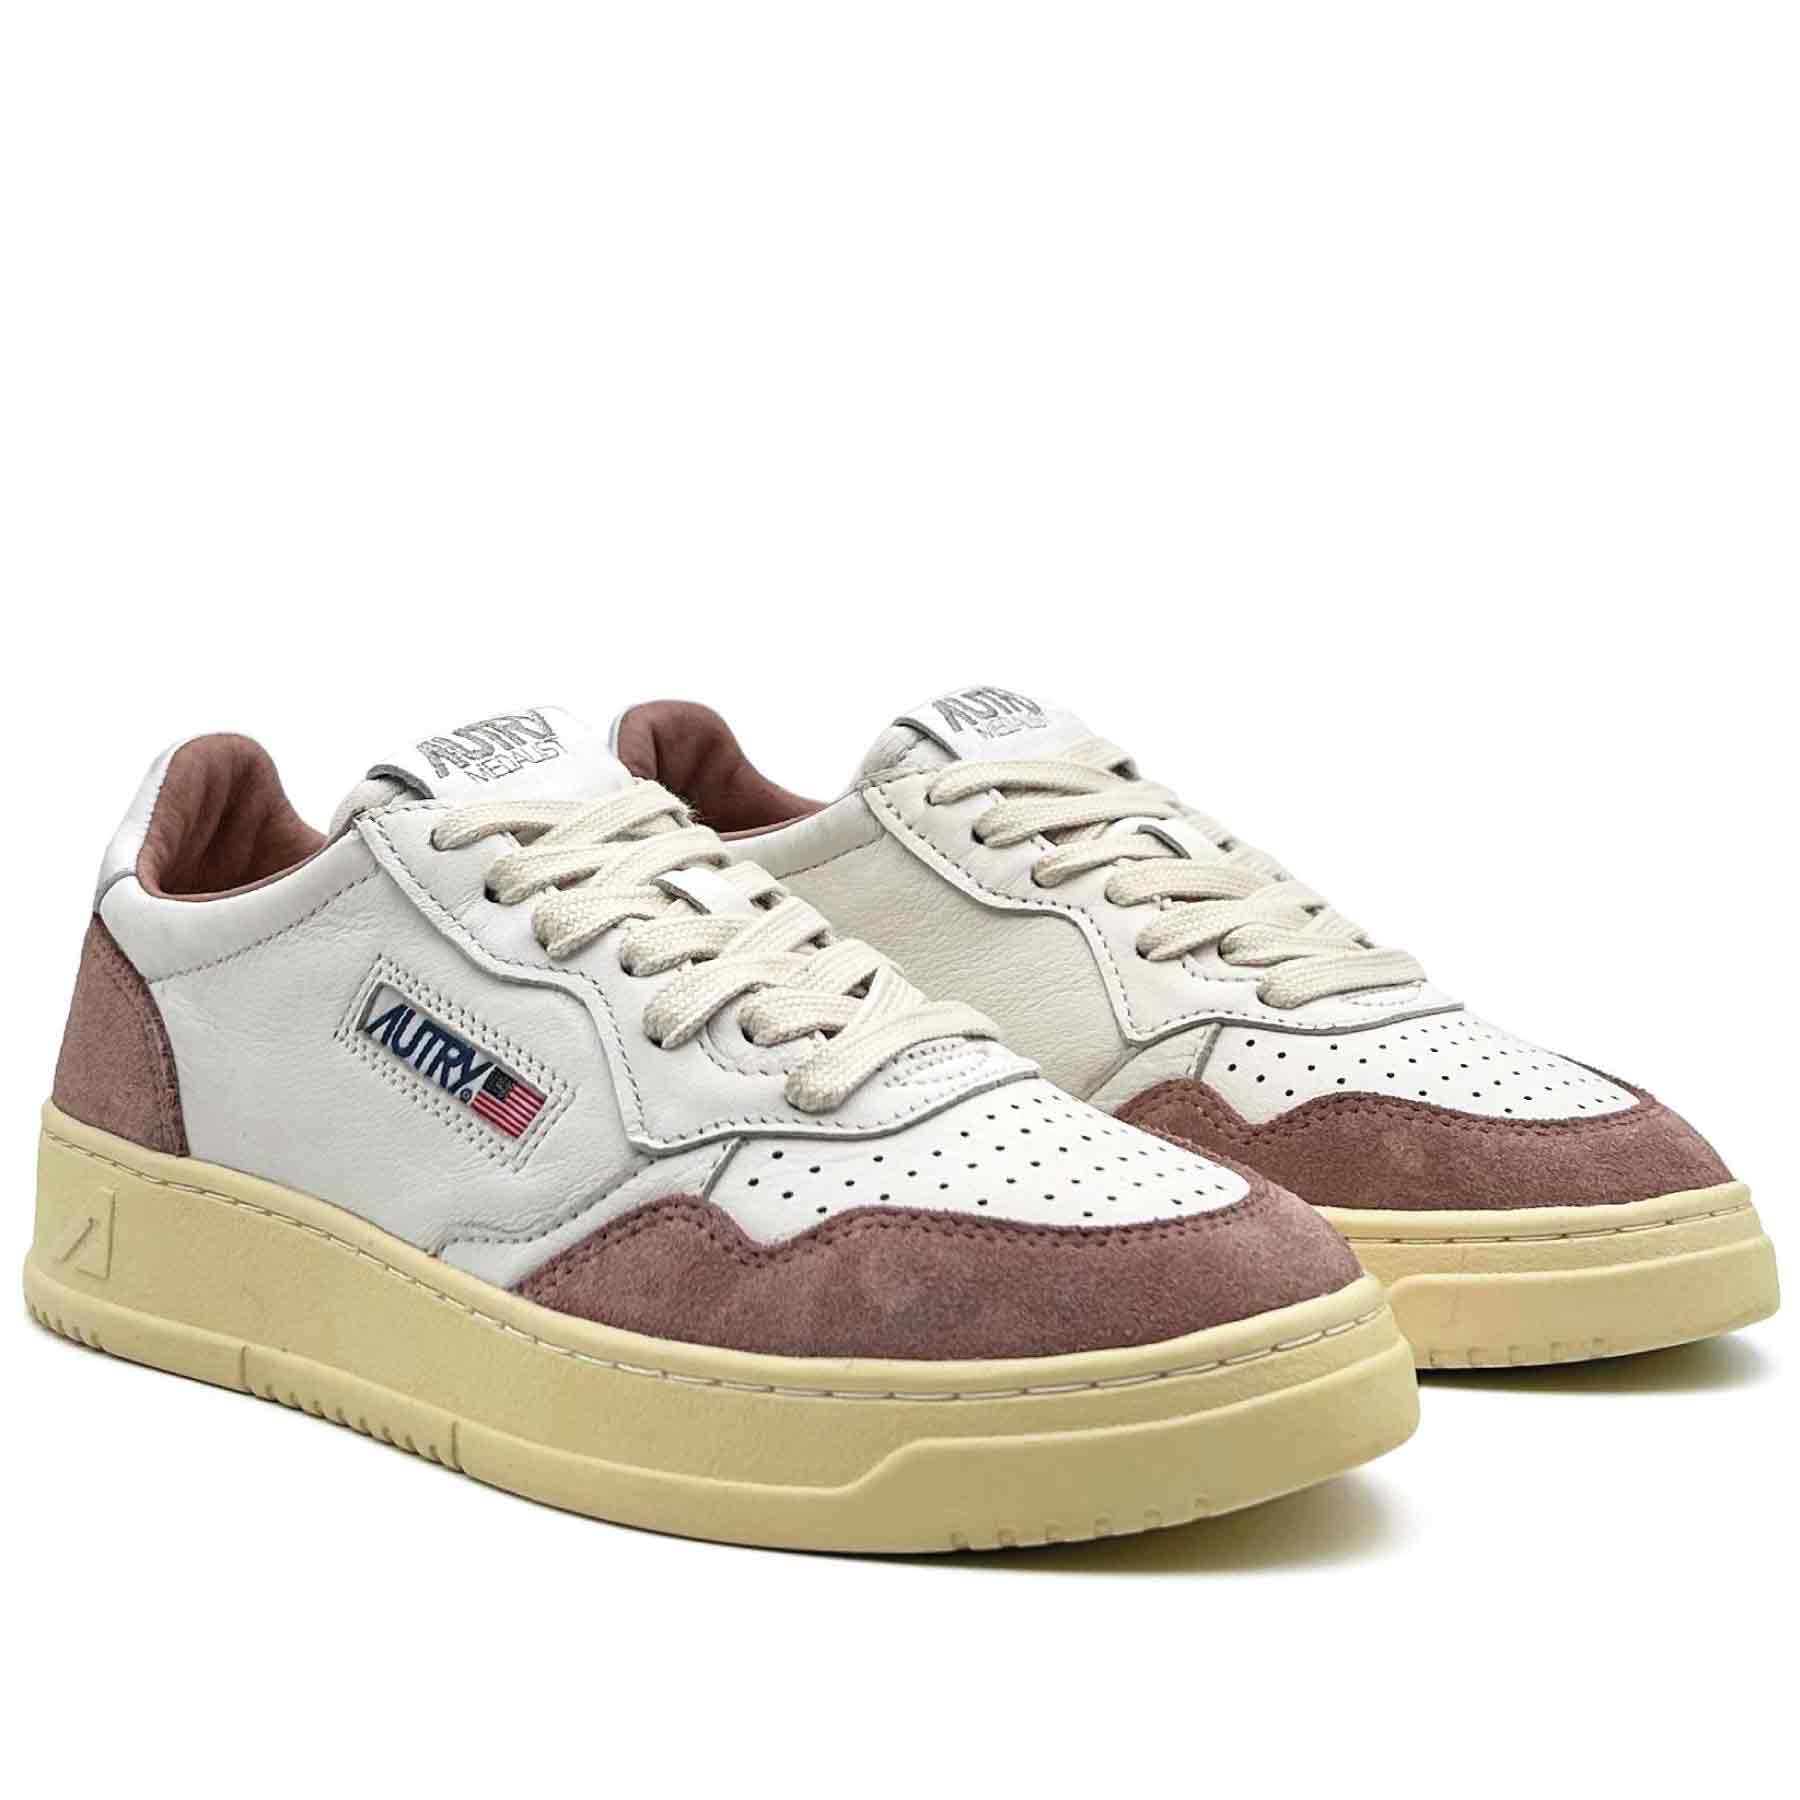 Medalist Low Women White Goat Leather Nude Suede